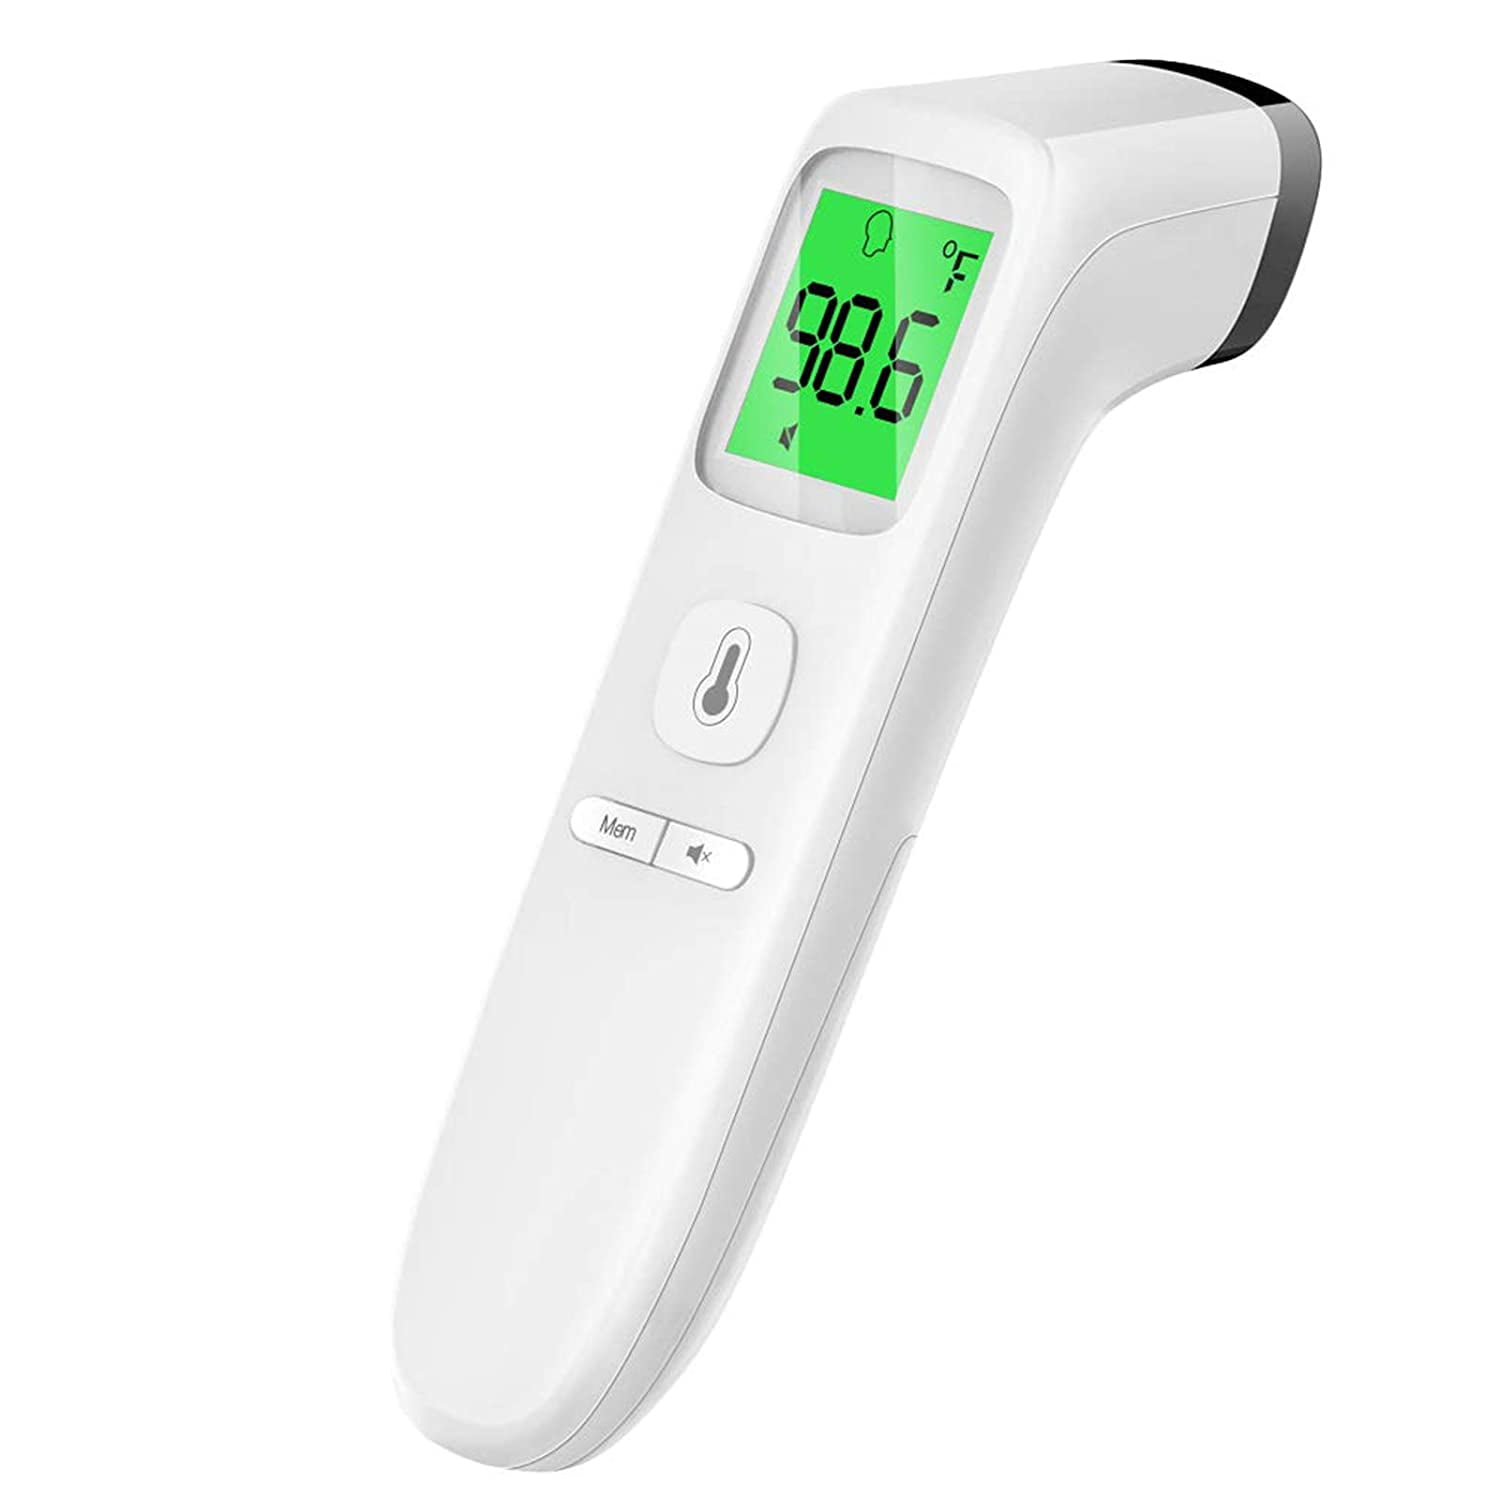 Forehead Thermometer for Baby and Adult Digital Infrared Forehead Thermometer Infrared Thermometer Non-Contact Digital Thermometer with Fever Alert Function 